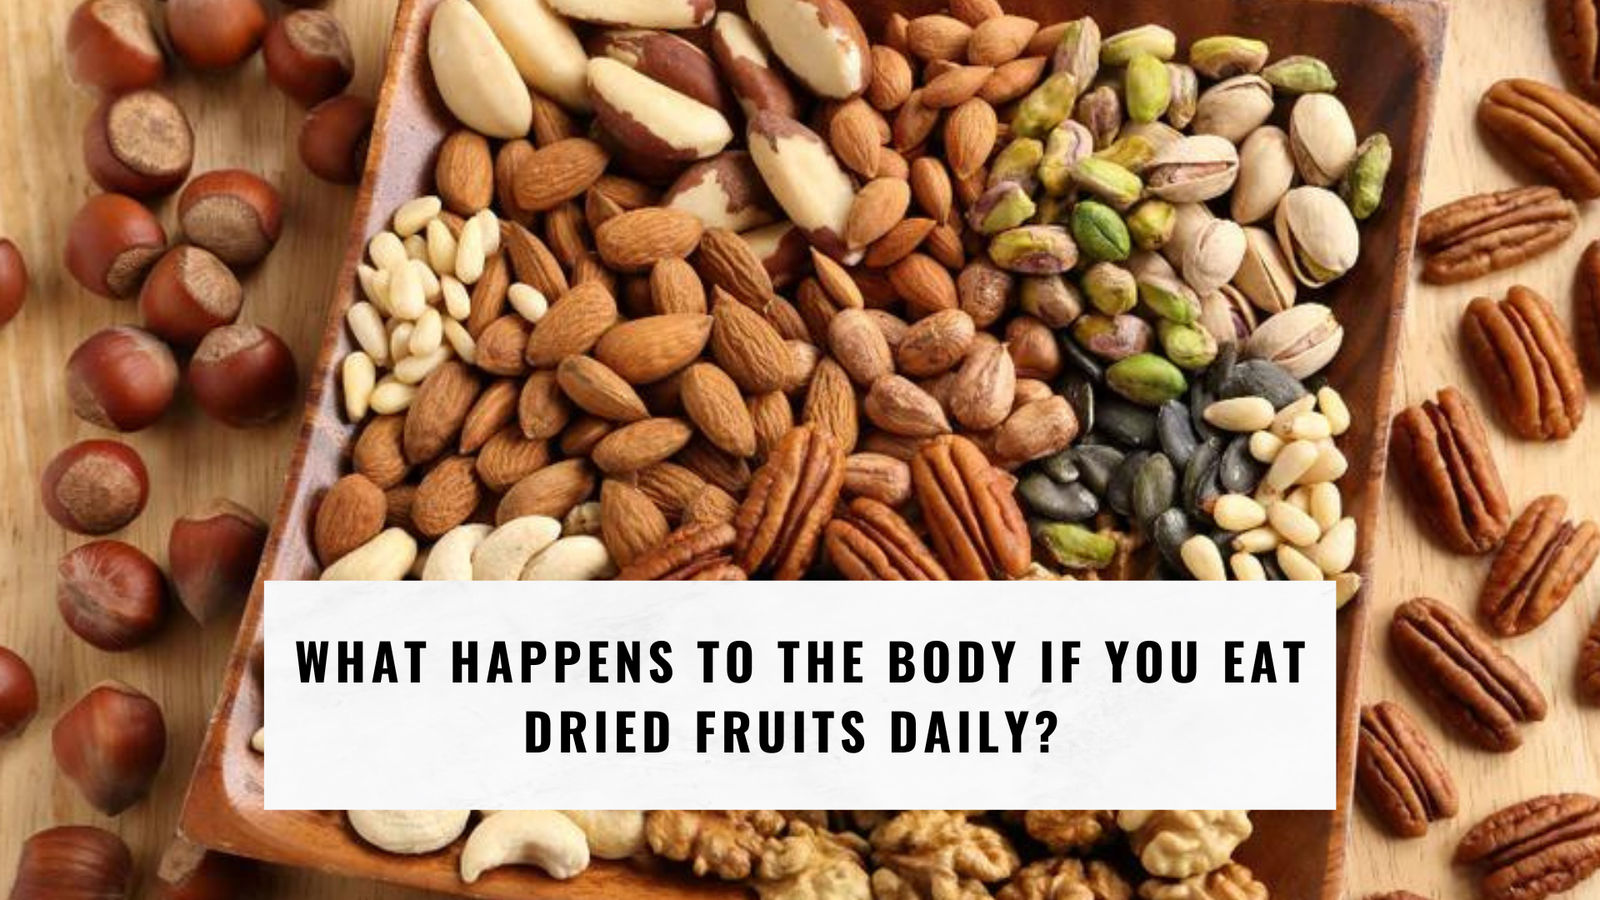 What happens to the body if you eat dried fruits daily?